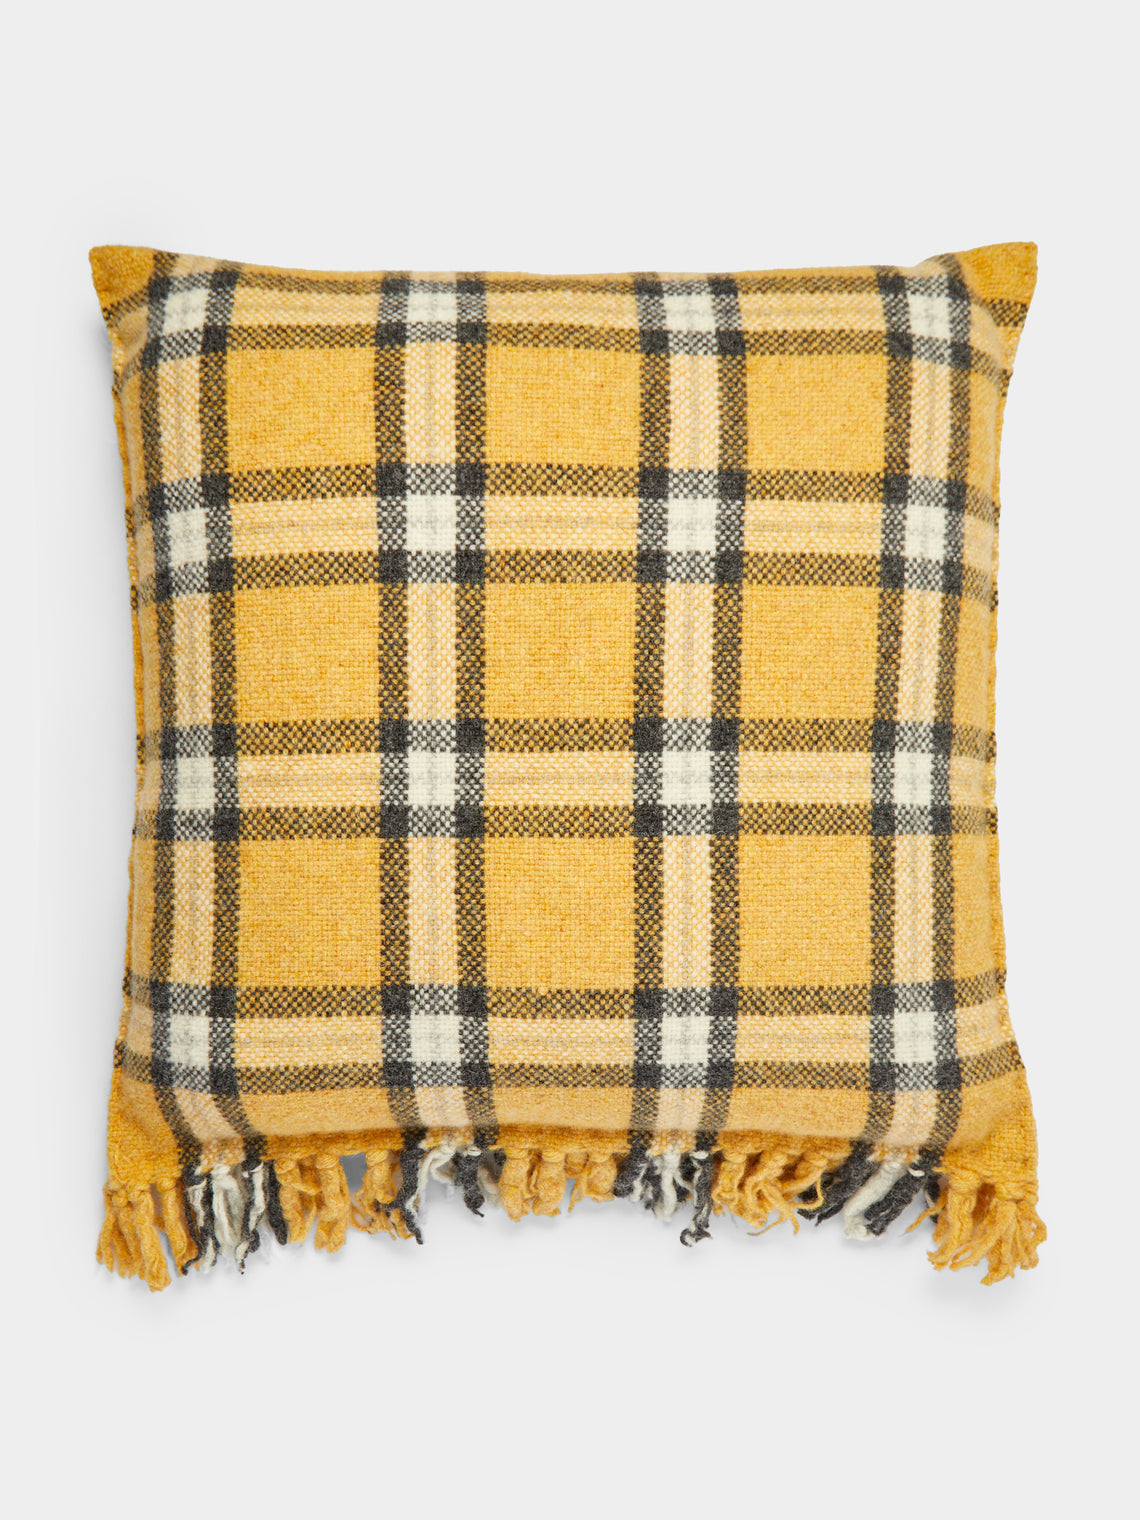 Hollie Ward - Archthine Handwoven Shetland Wool Check Cushion -  - ABASK - 